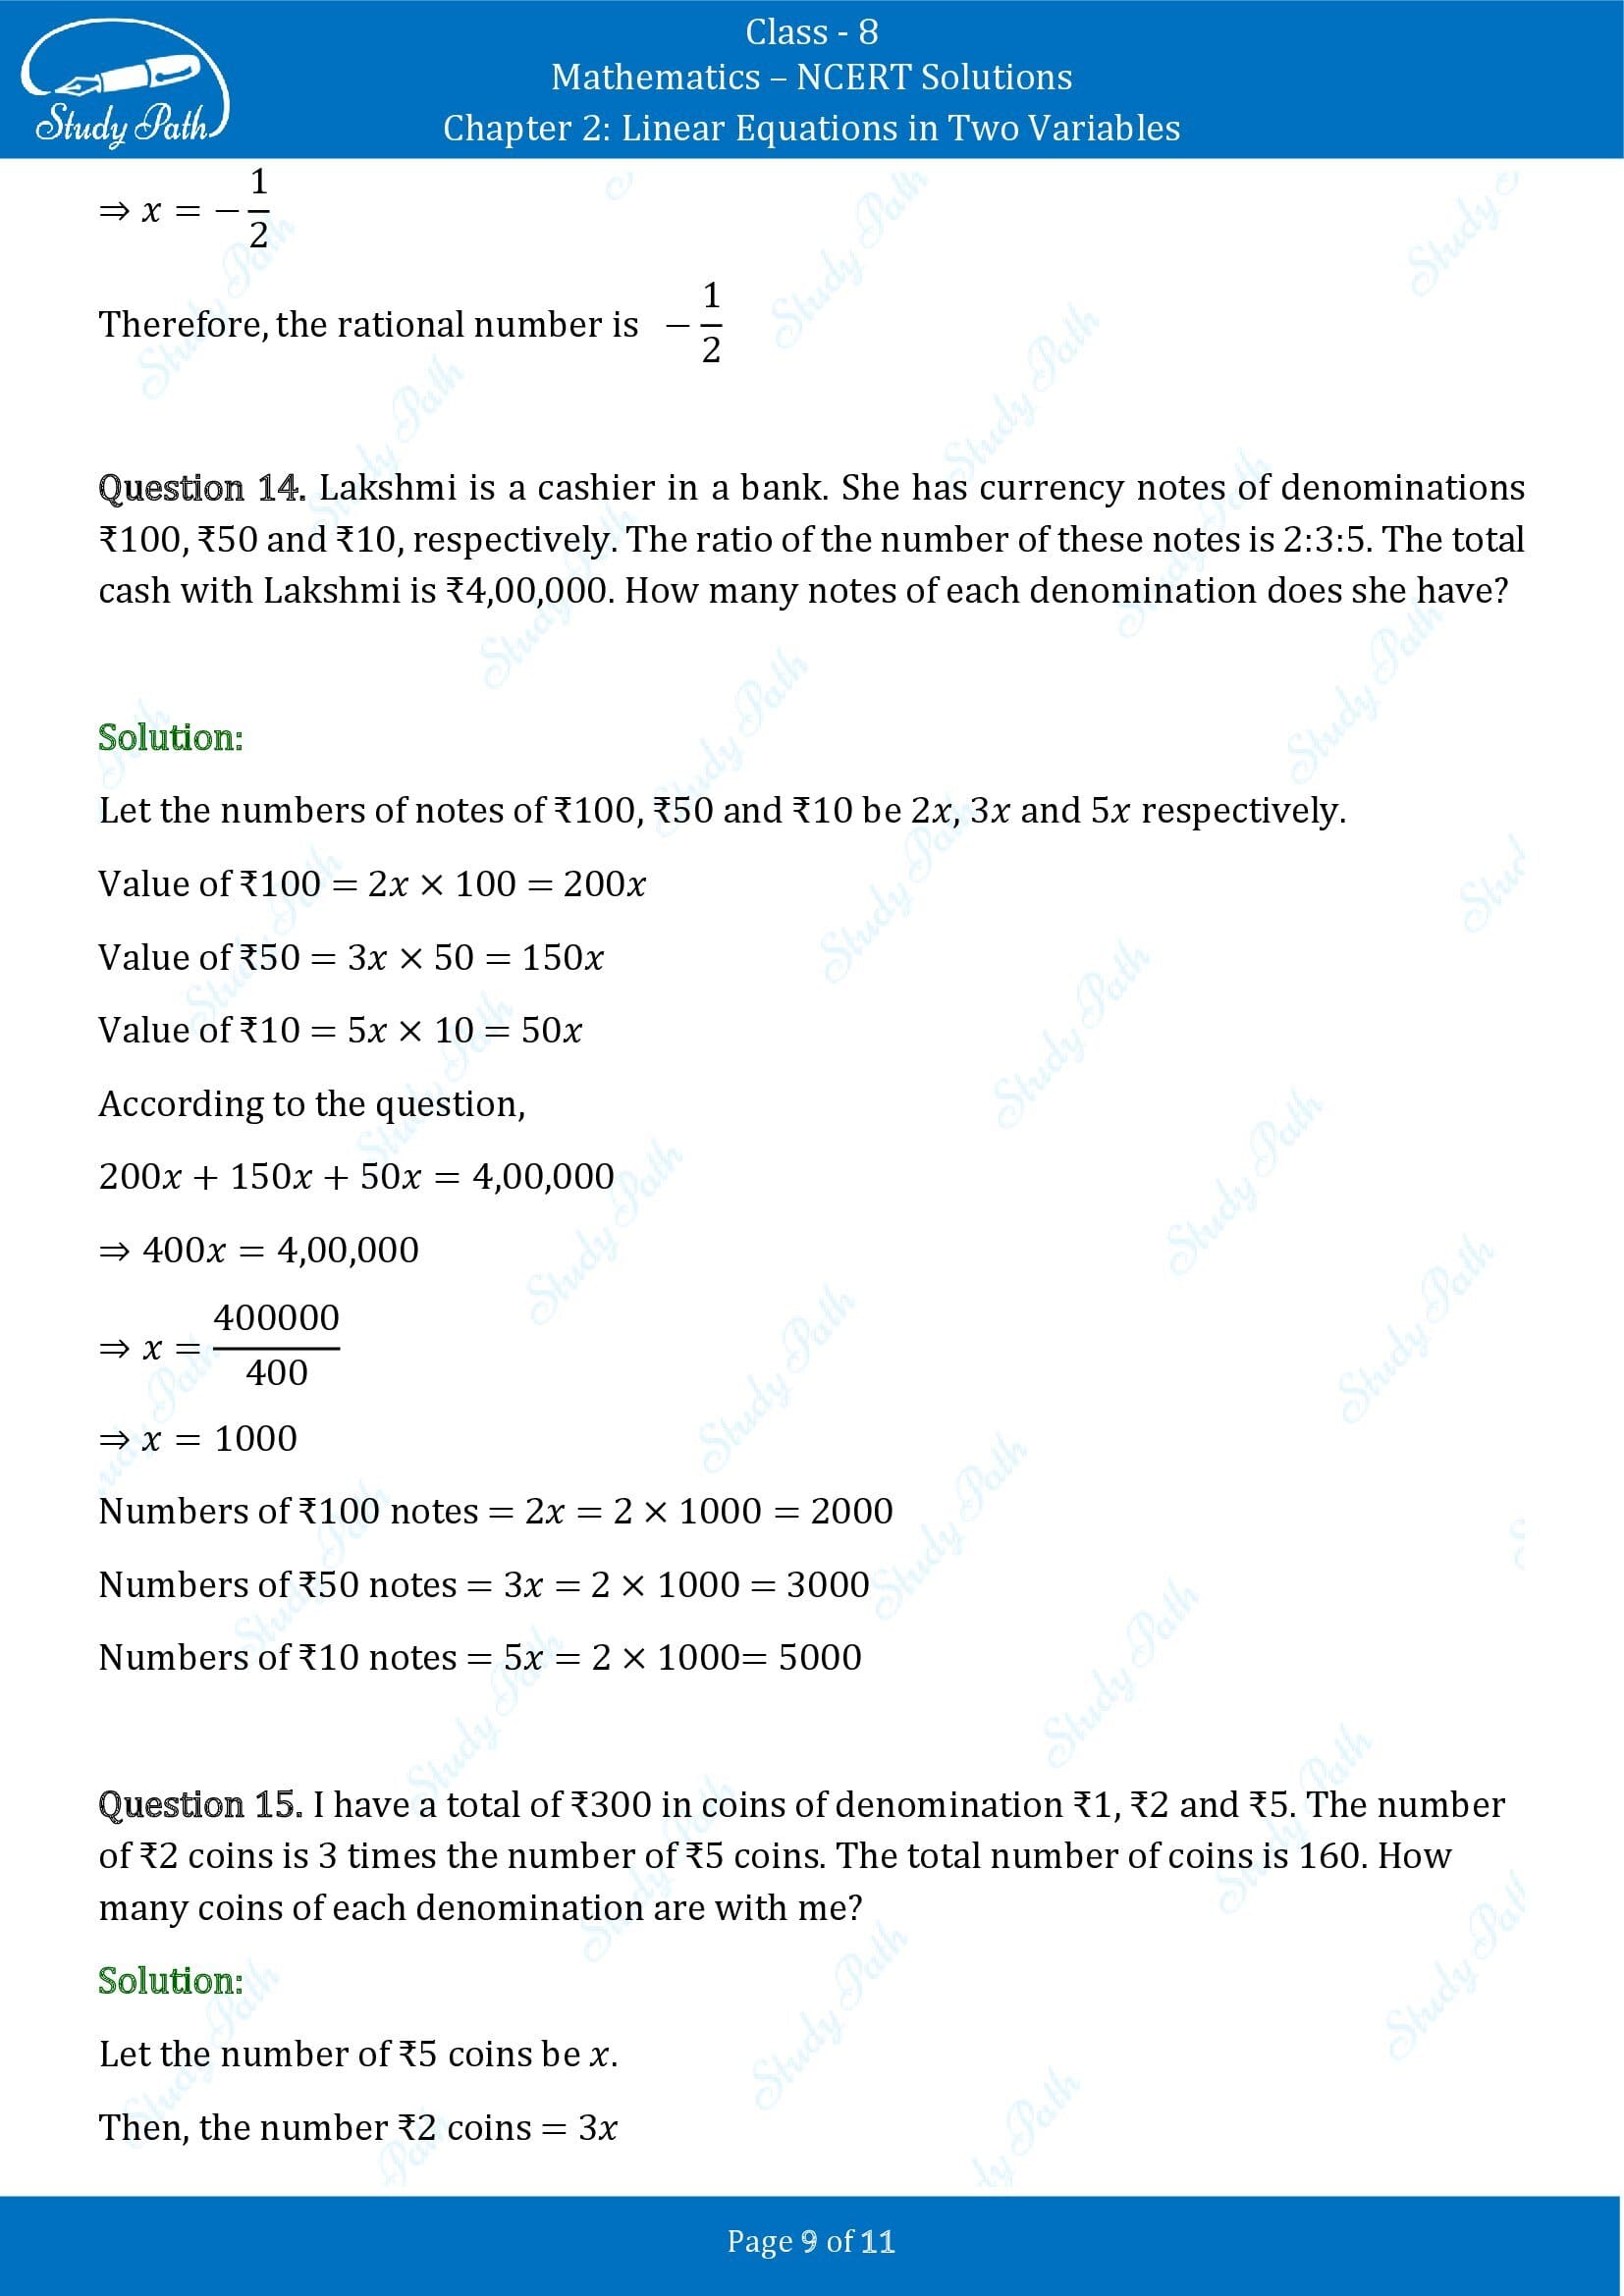 NCERT Solutions for Class 8 Maths Chapter 2 Linear Equations in Two Variables Exercise 2.2 00009